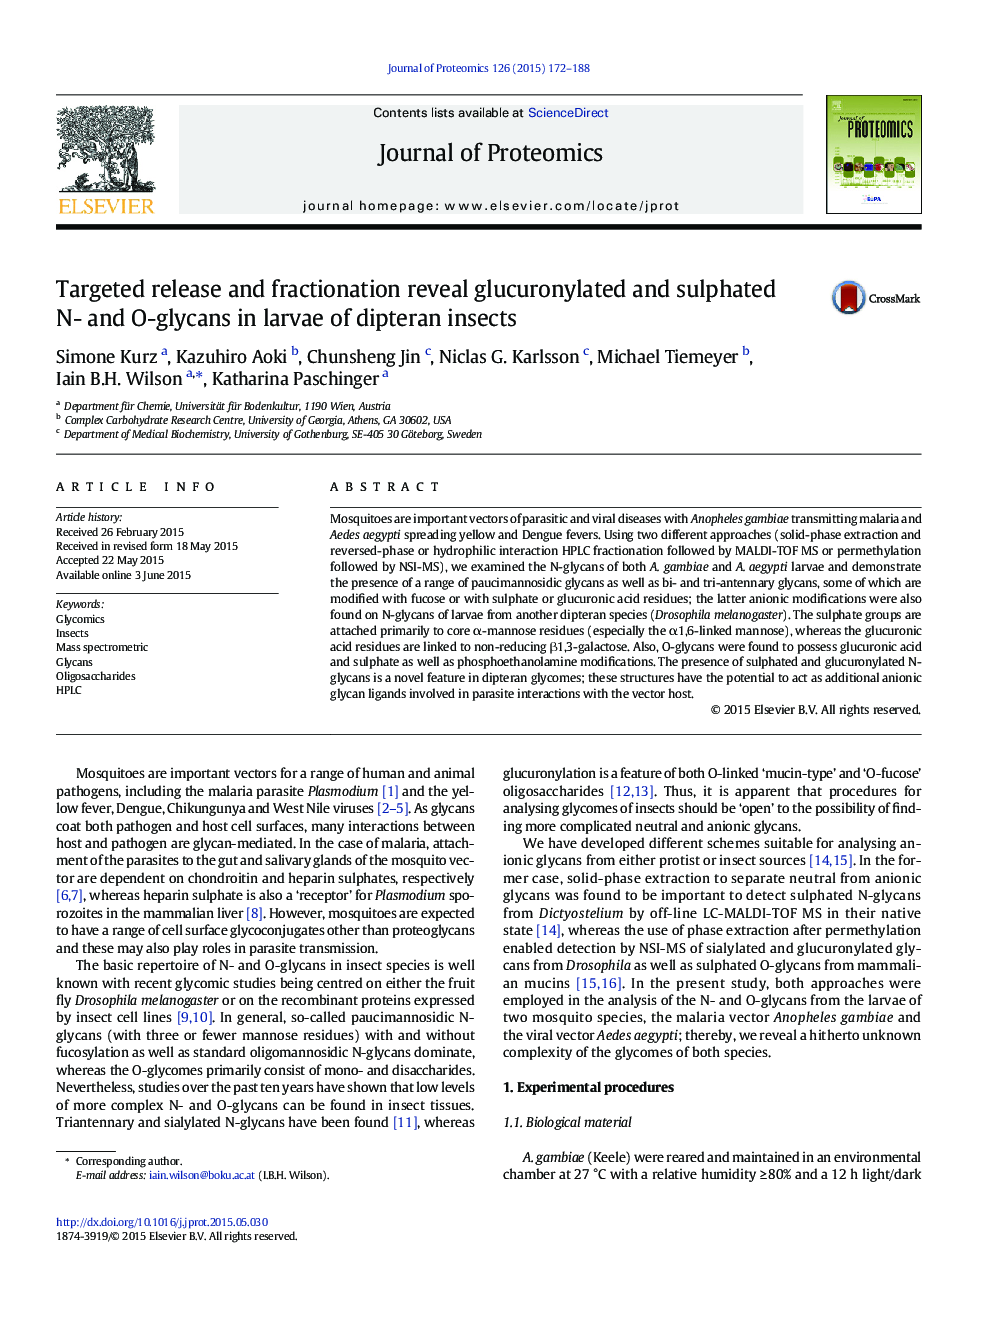 Targeted release and fractionation reveal glucuronylated and sulphated N- and O-glycans in larvae of dipteran insects